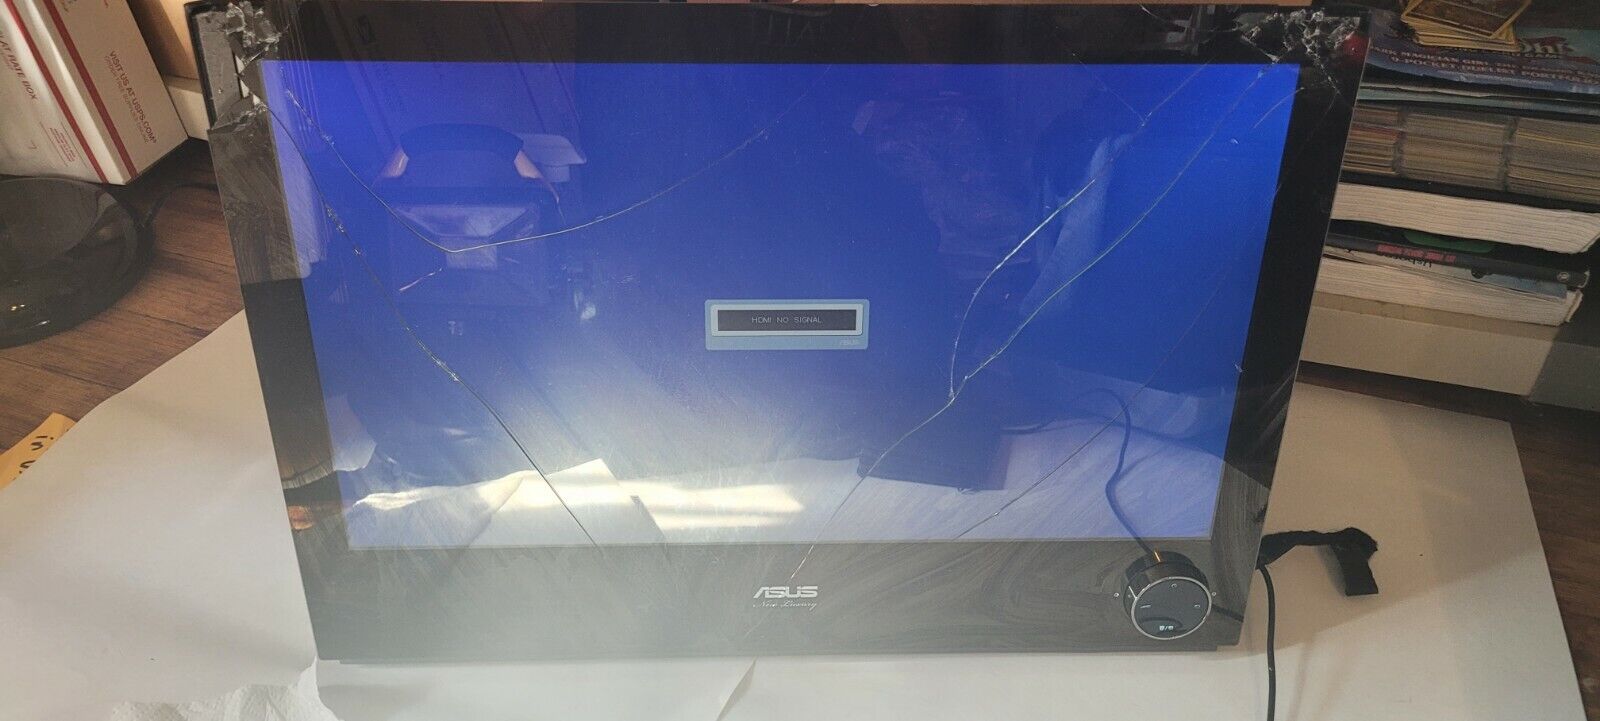 Asus LS246H monitor, Used HIGH END ULTIMATE LUXURY MASTERPIECE [CRACKED GLASS]